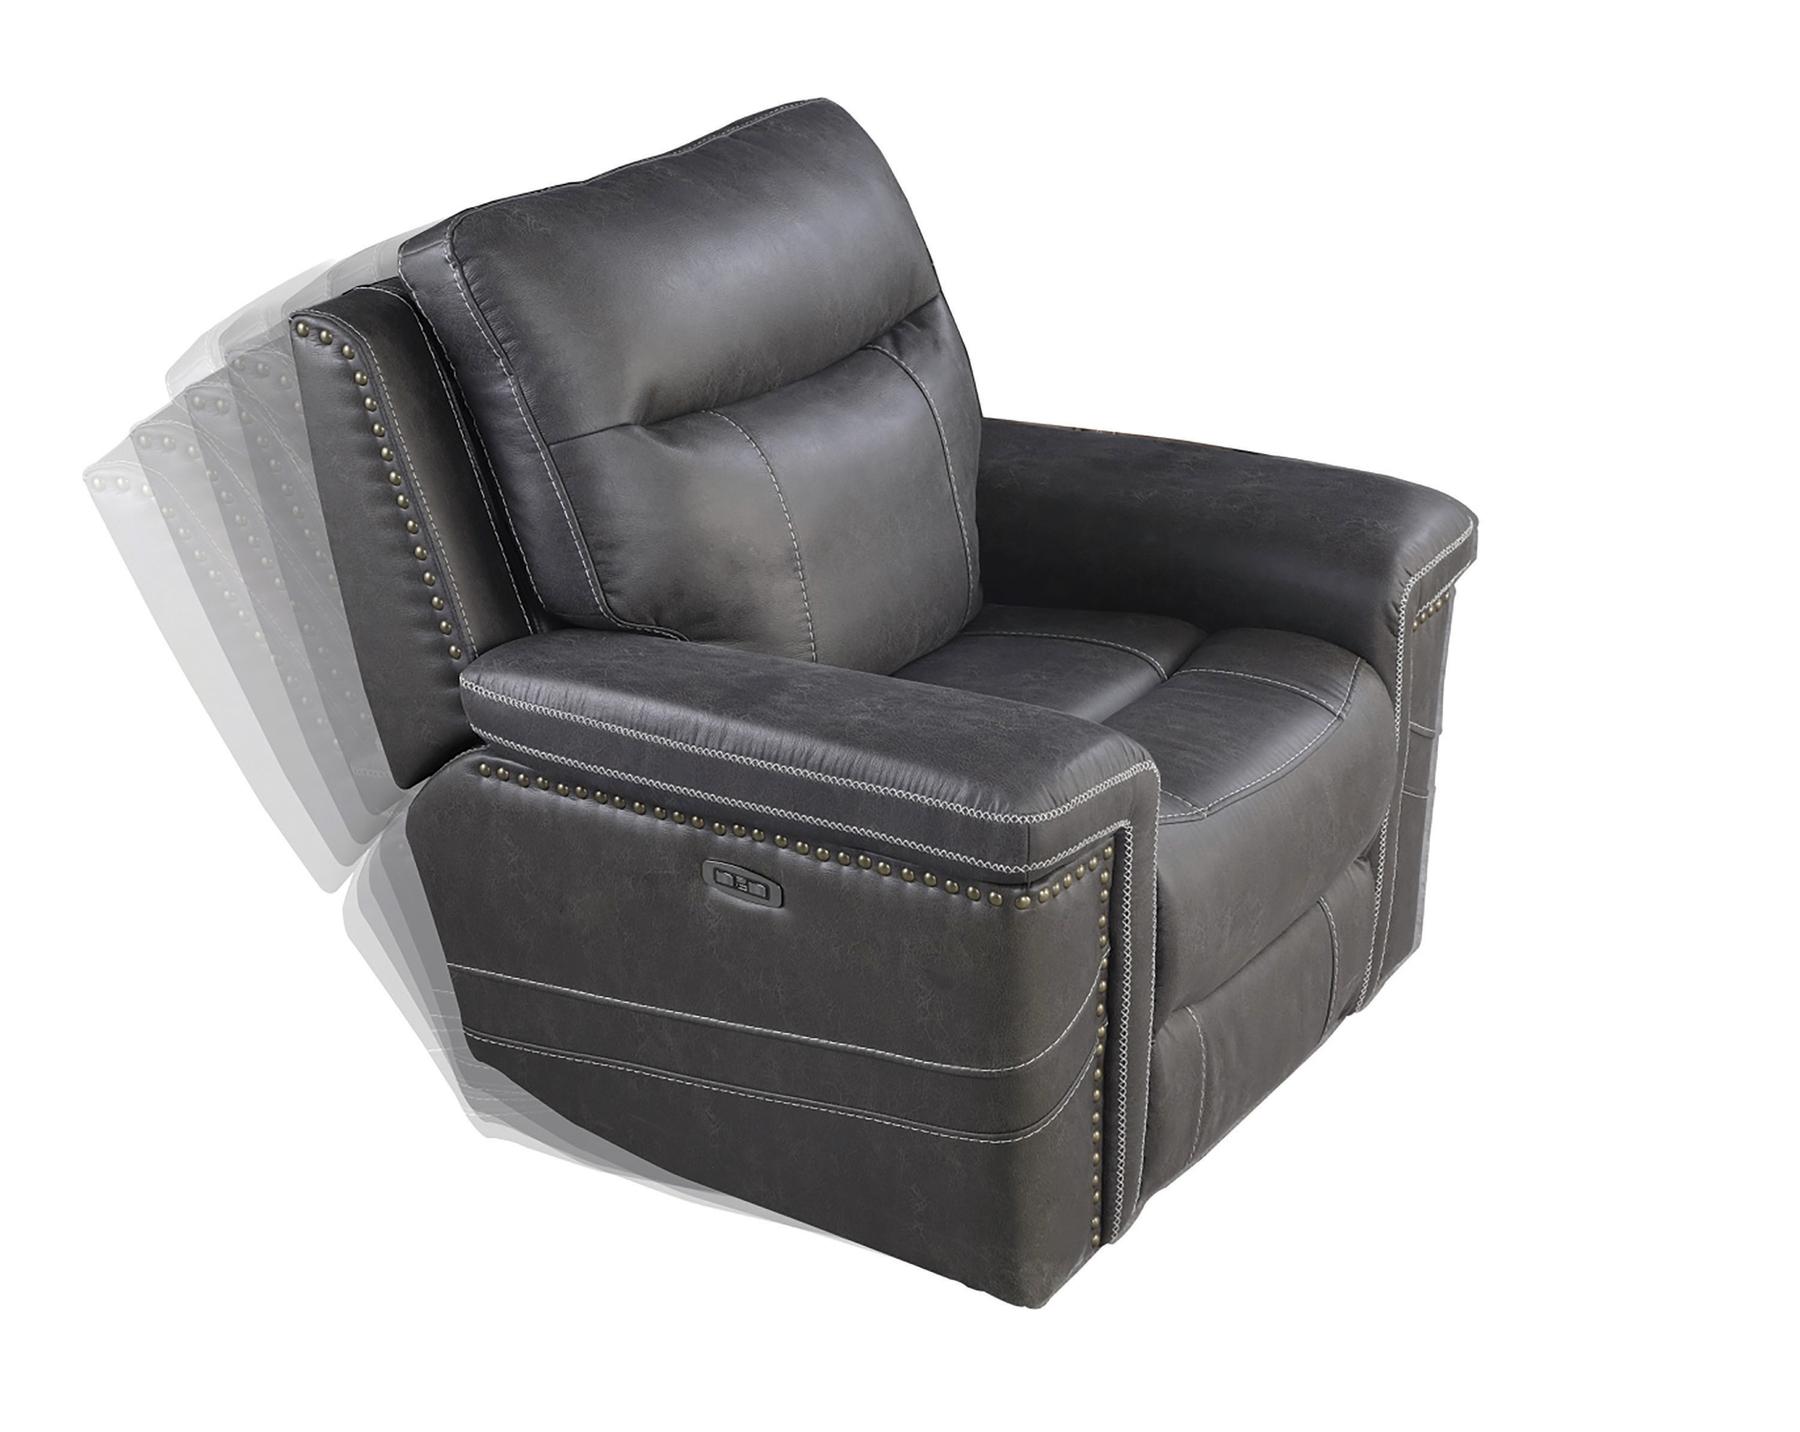 

    
Coaster 603516PP Wixom Power recliner Charcoal 603516PP
